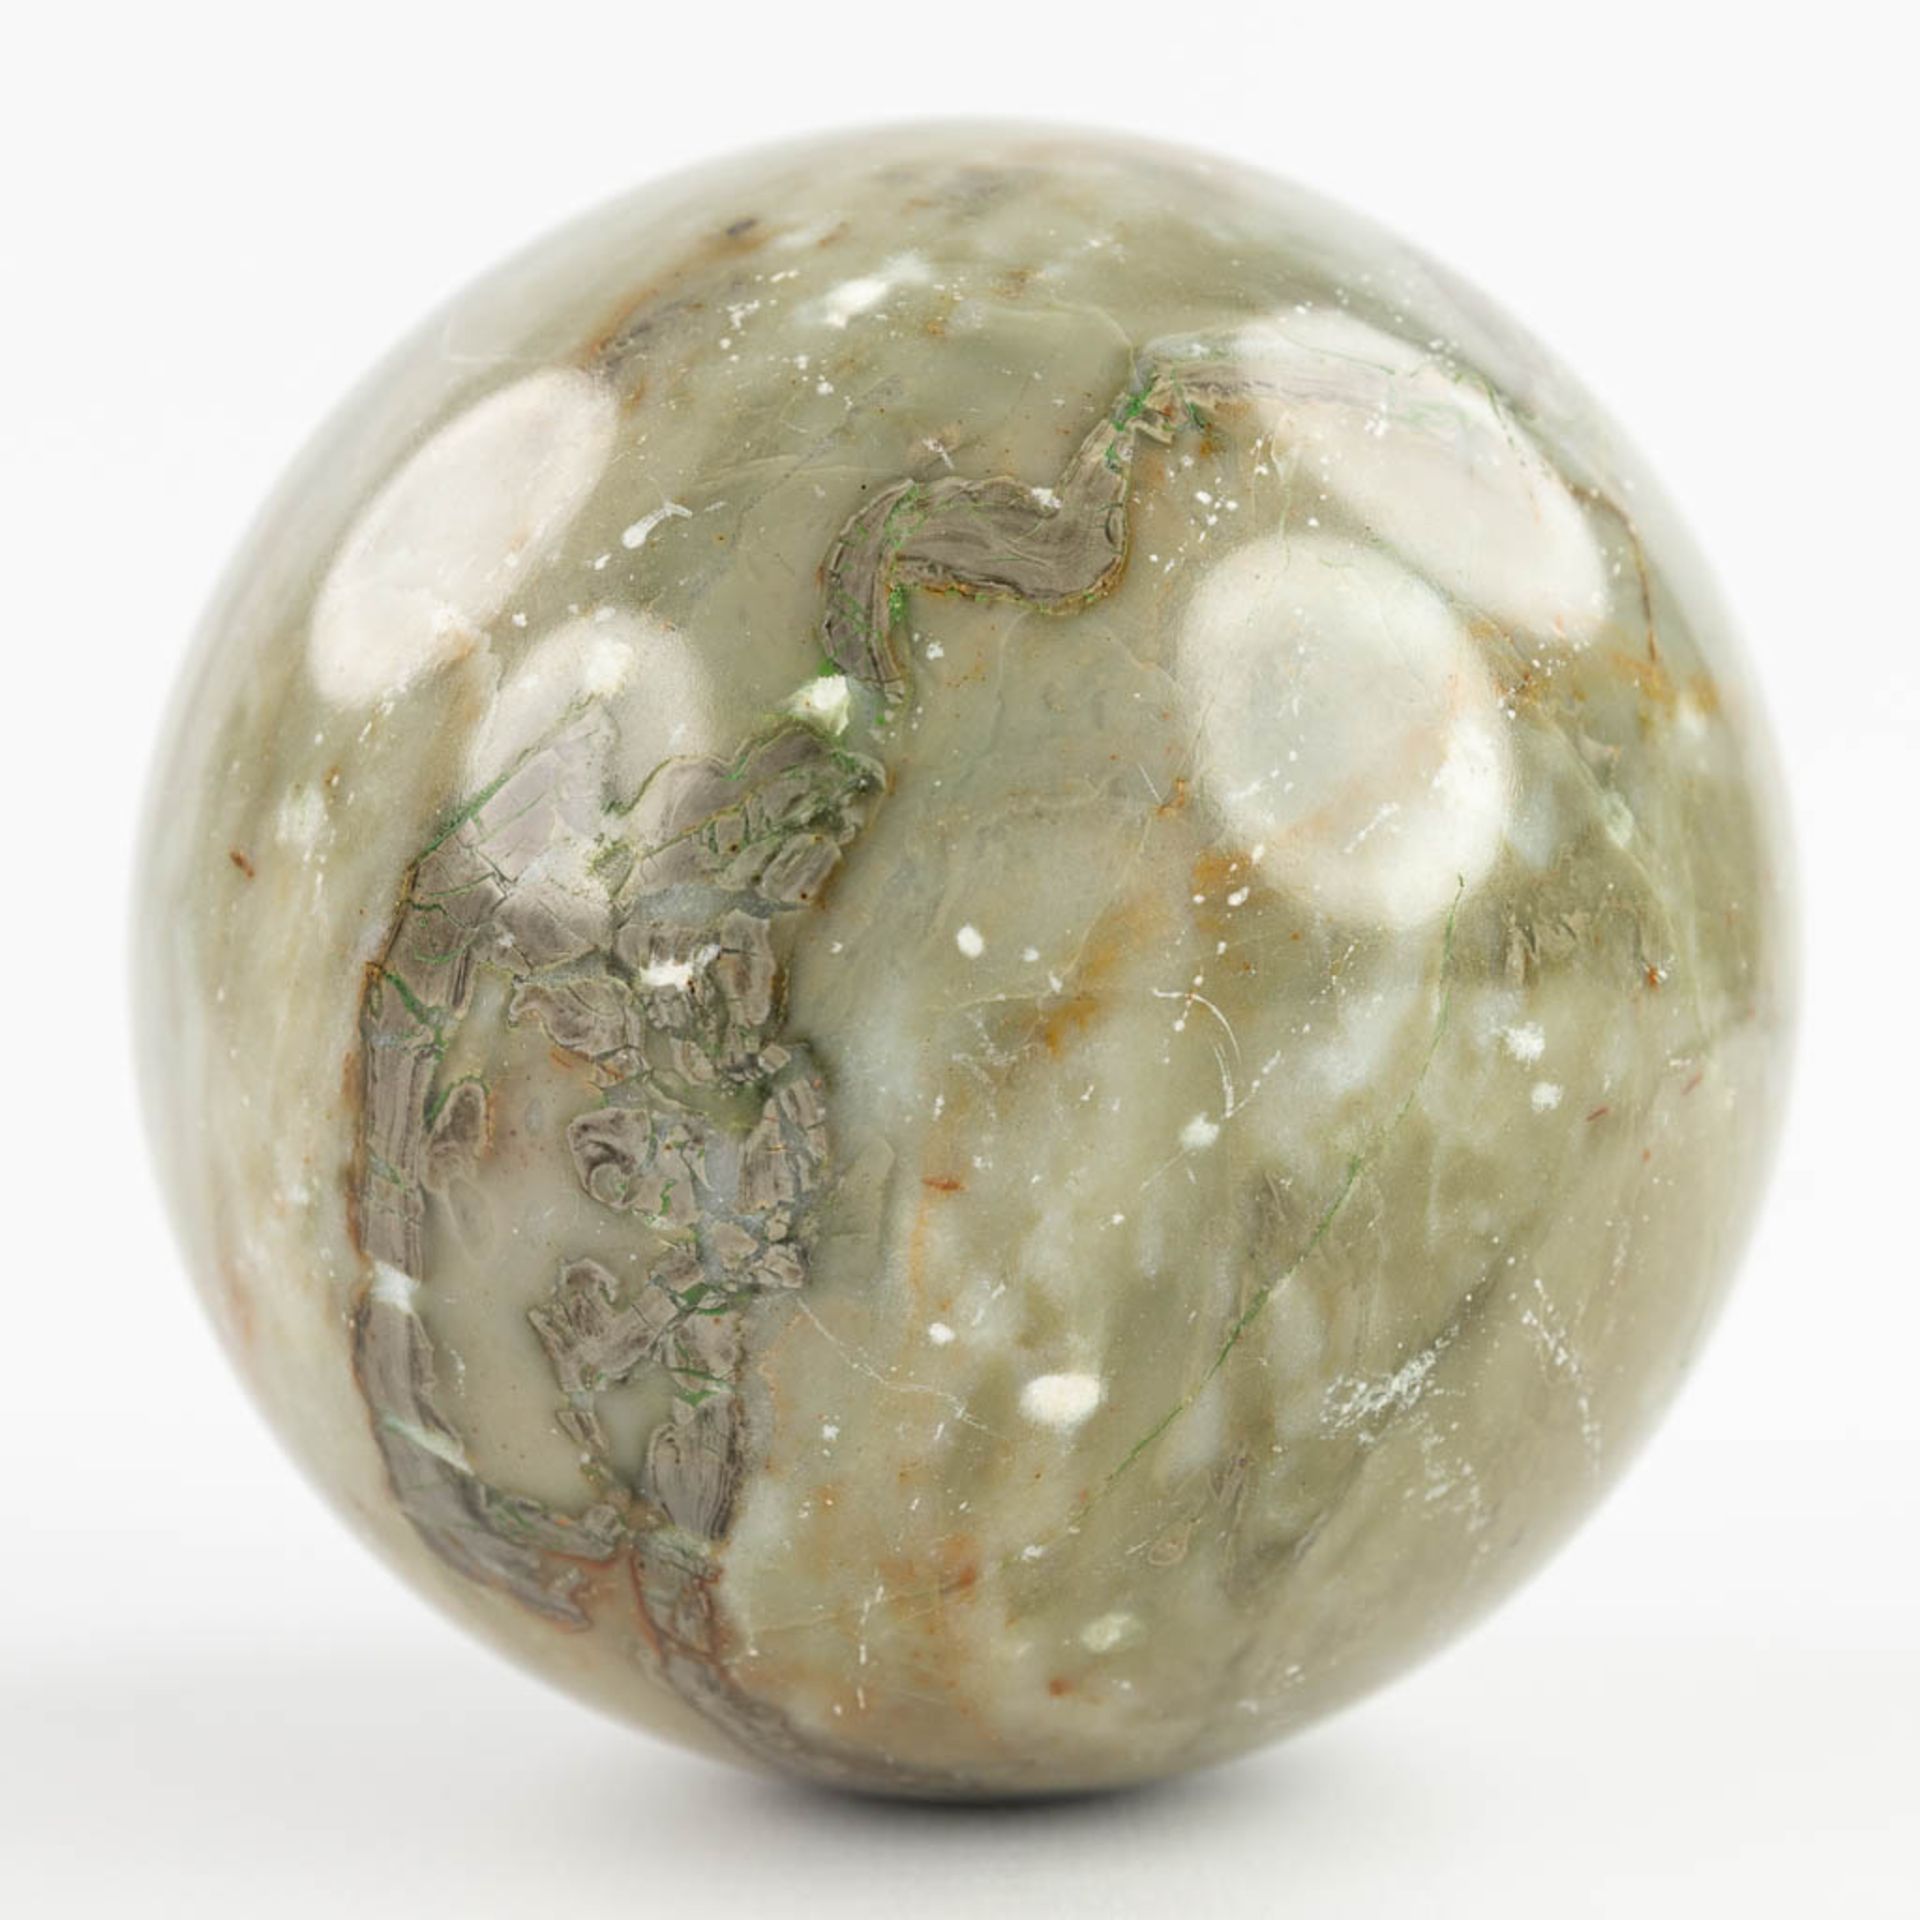 A set of 4 balls made of natural stone and marble. 20th century. (D: 9 cm) - Image 7 of 8